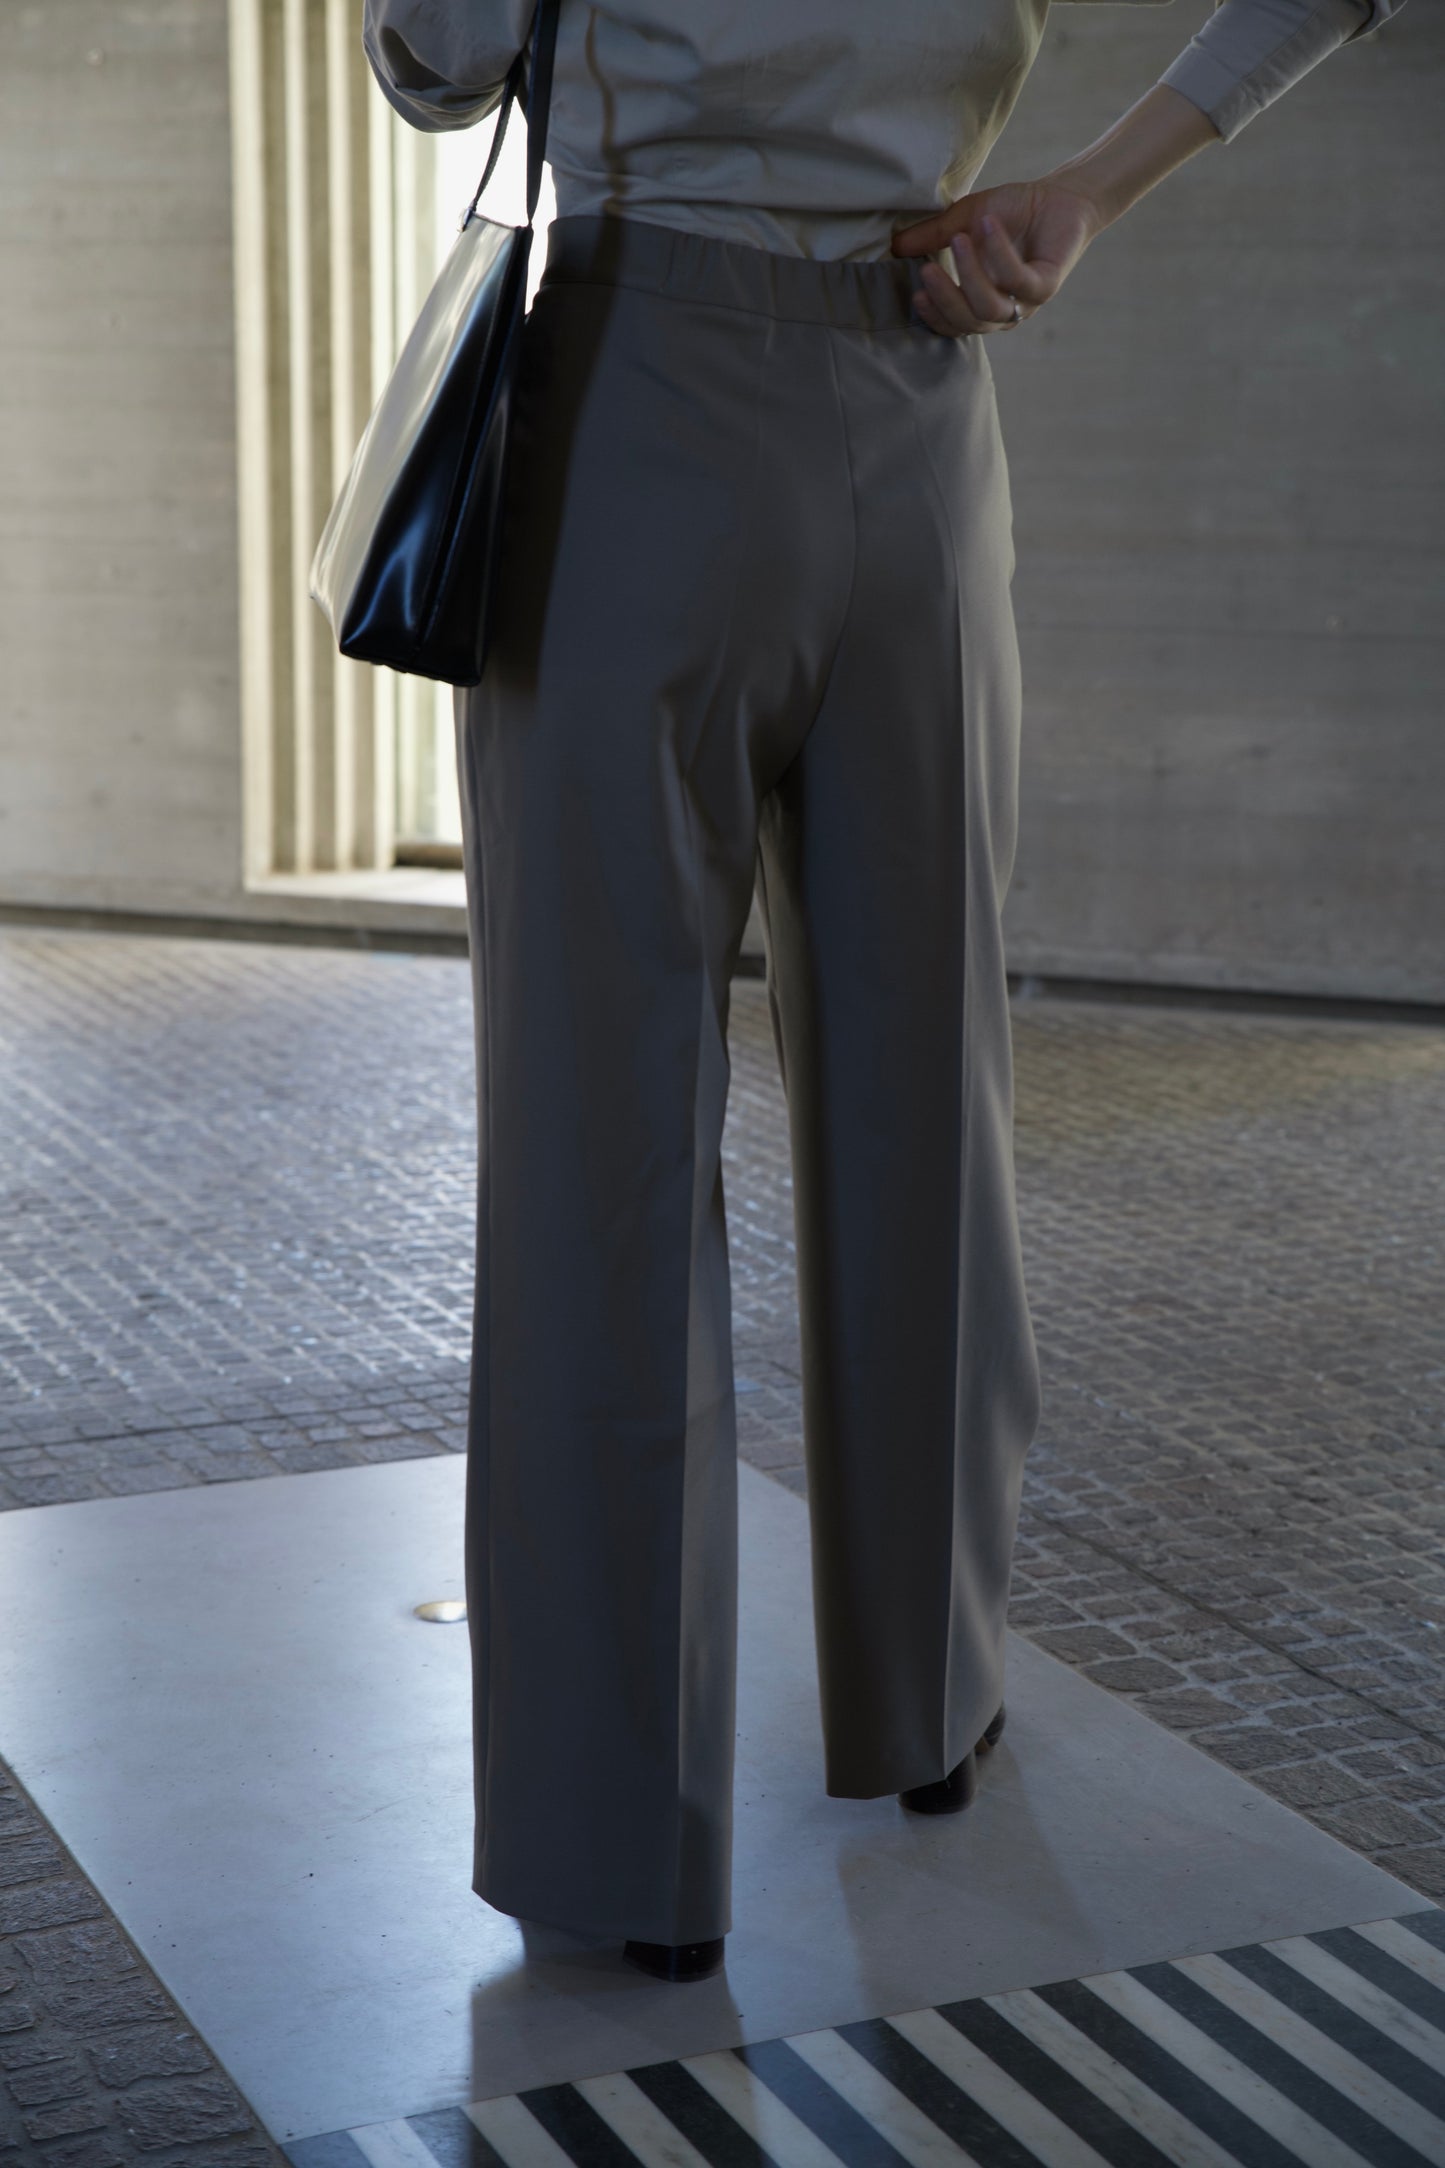 Jago - tailored wool trousers